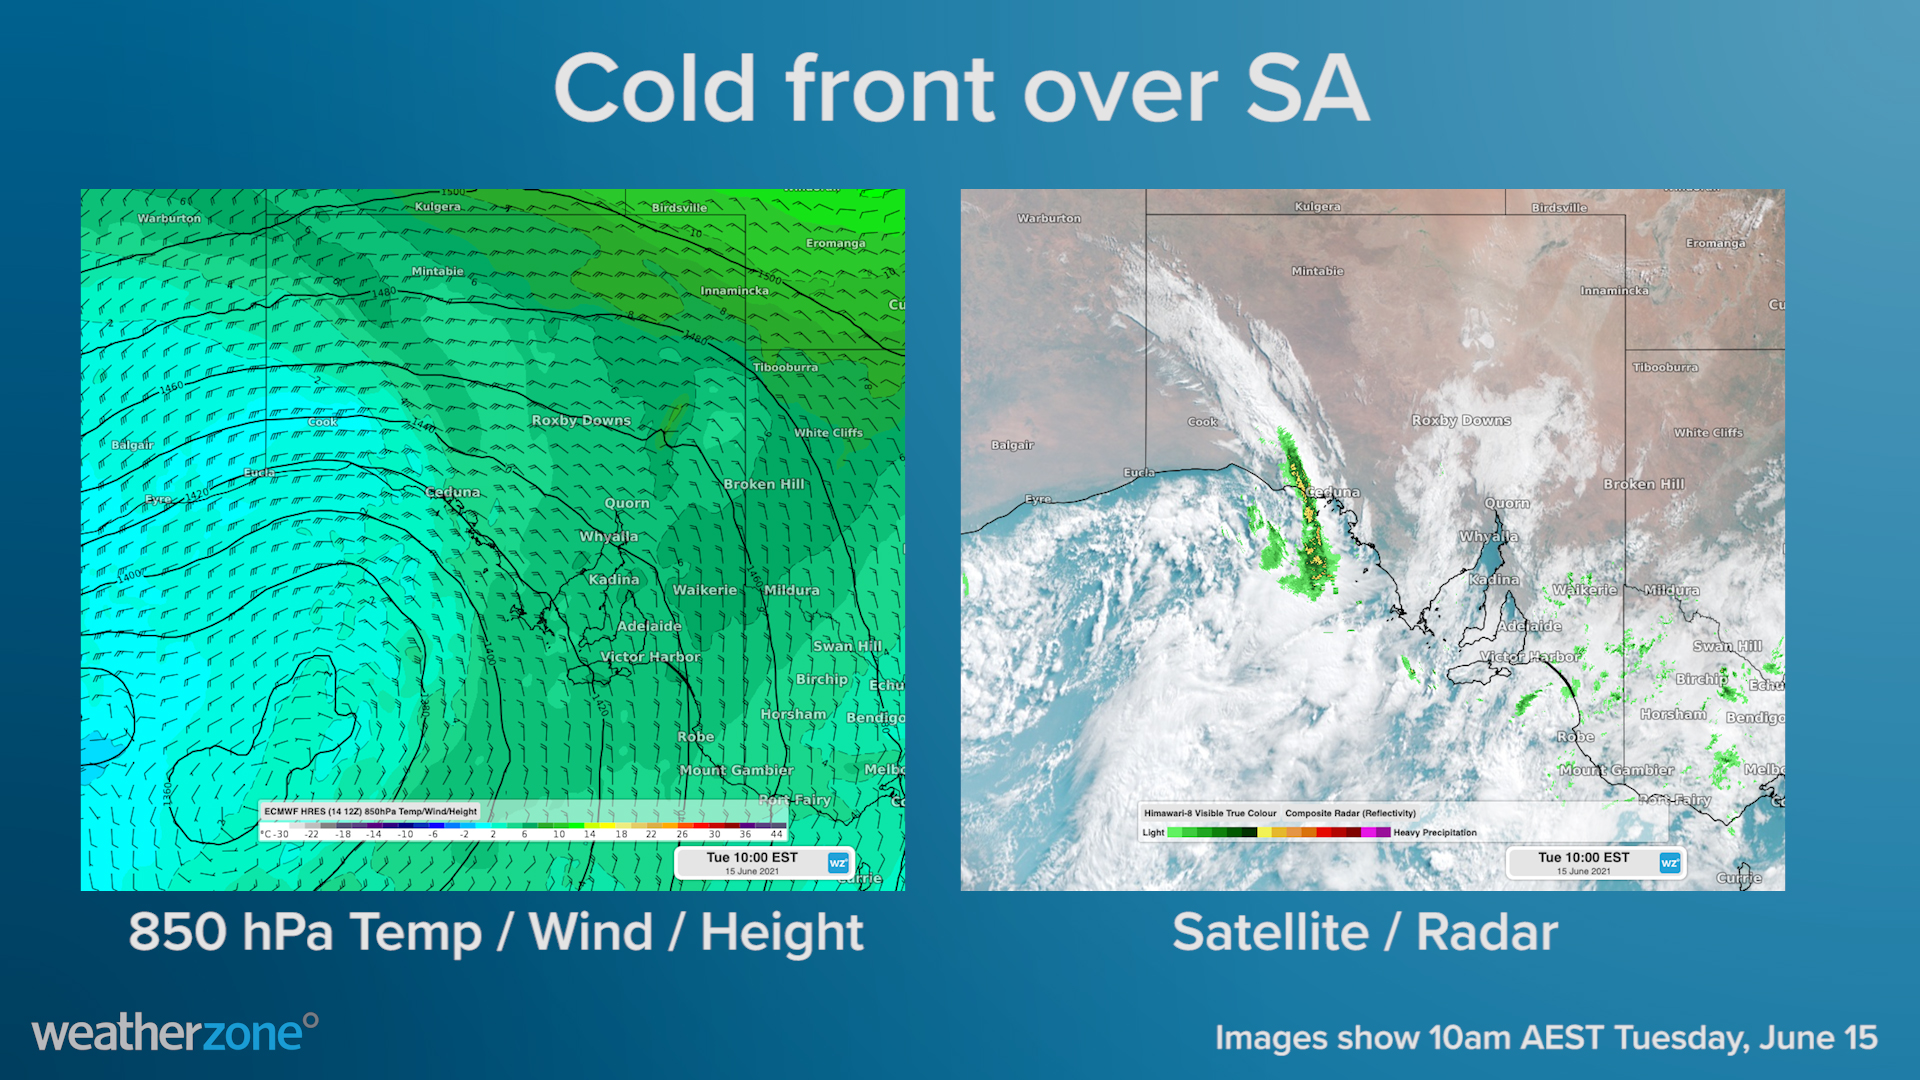 How cool are these images of a cold front over SA?